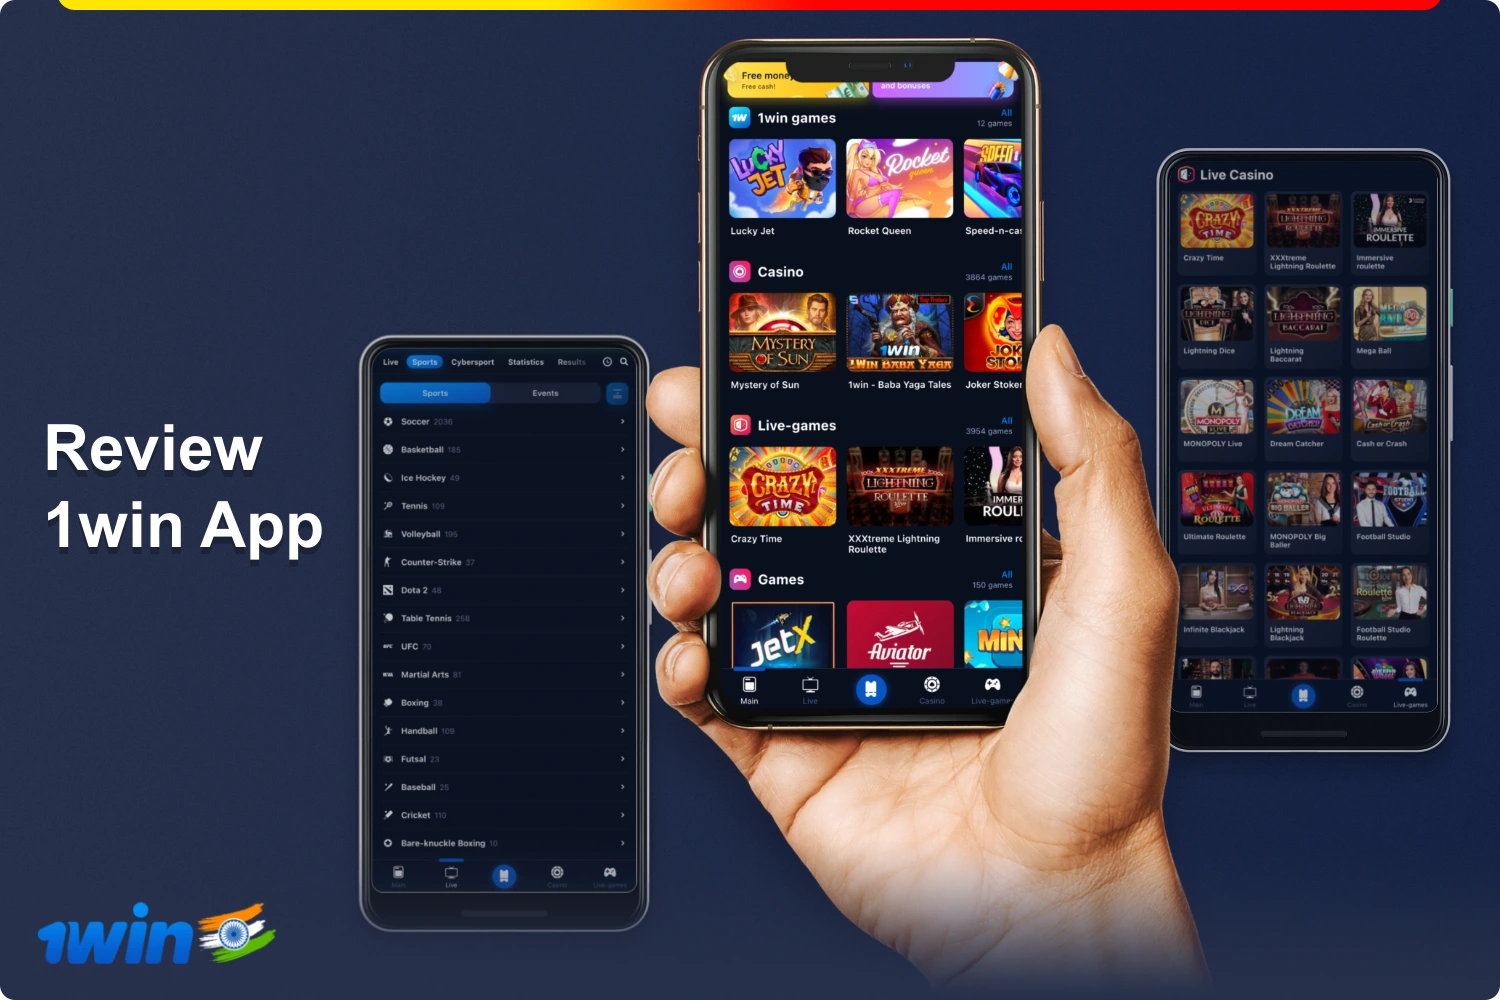 1win mobile app allows Indian users to bet on sports and casinos on the go